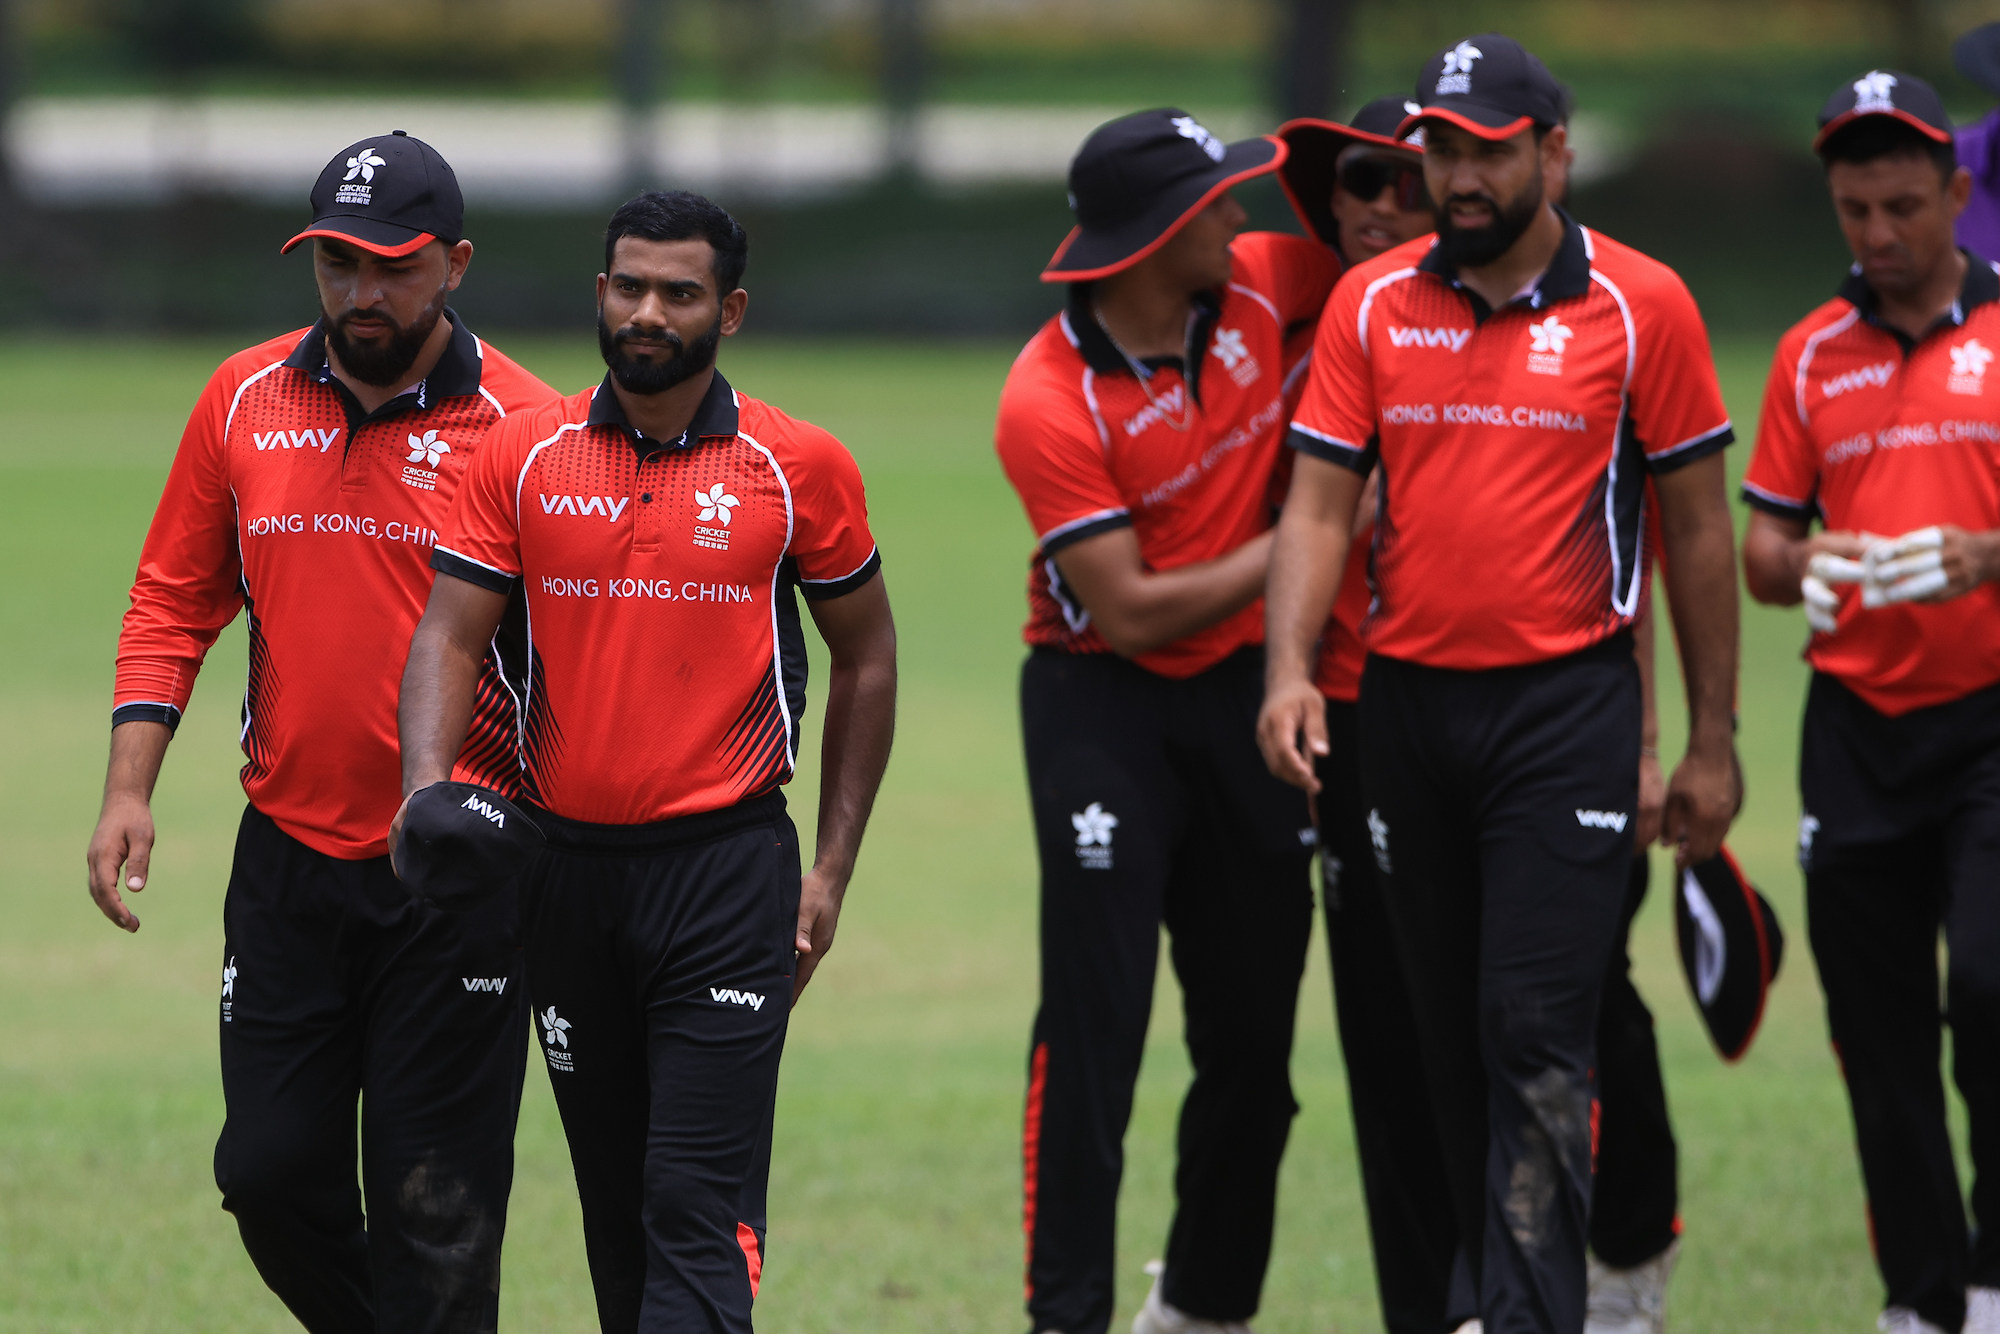 Hong Kong’s players have been challenged to raise their game to stay in the T20 World Cup hunt. Photo: Peter Lim/PhotoDesk.com.my